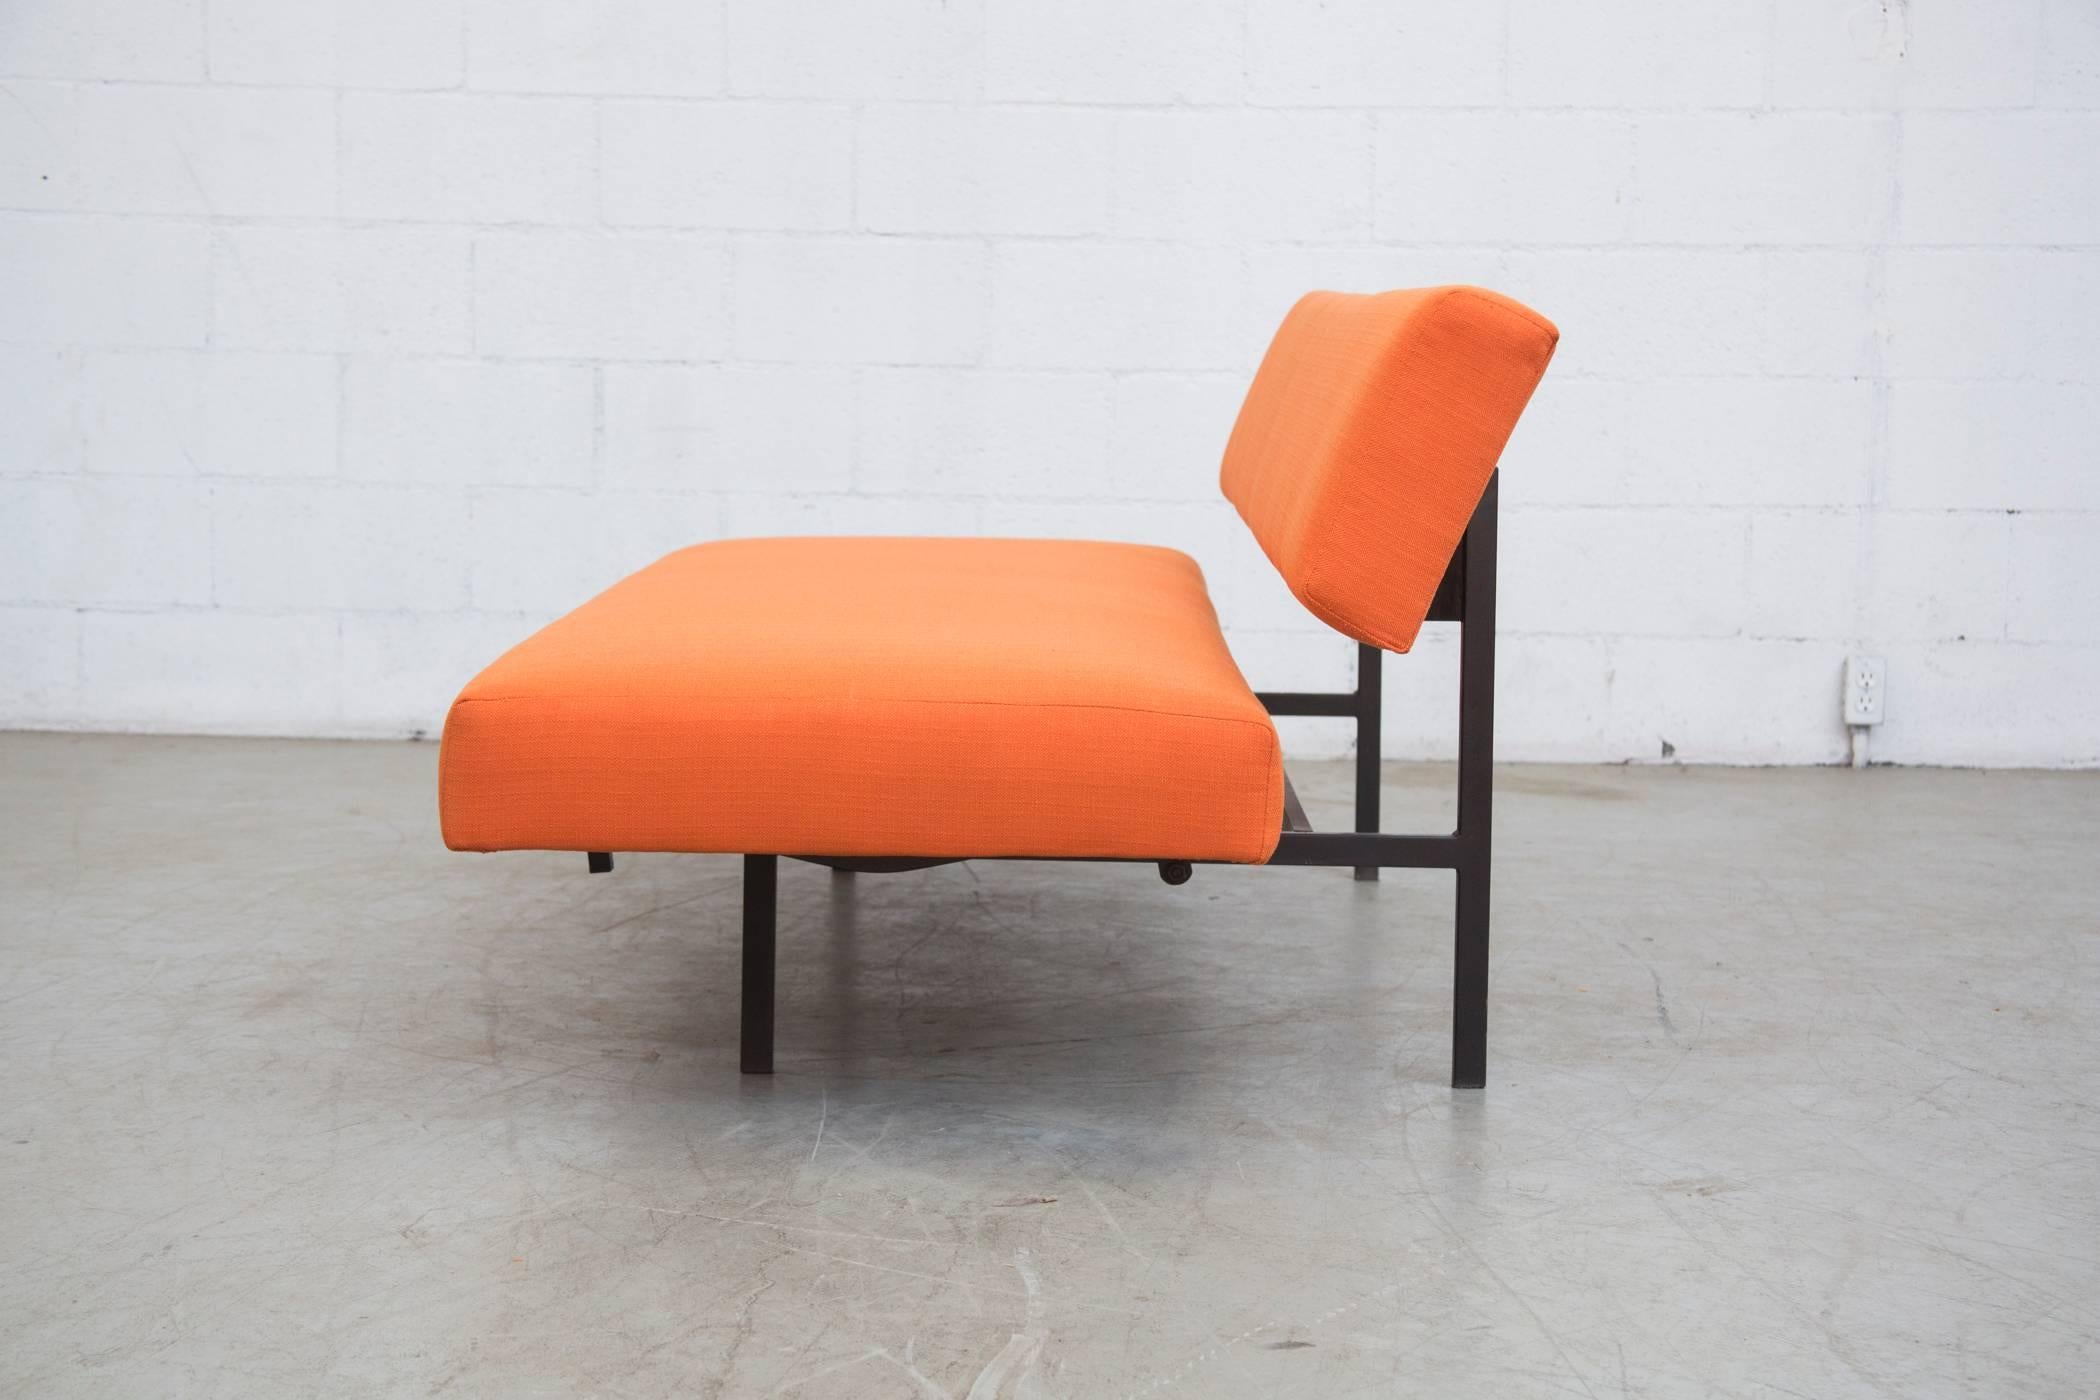 Original steel tubular framed sleeper sofa newly upholstered in orange. The seat pulls forward to transform the sofa into a single sleeping bed. Handsome and useful! Frame in original condition with some signs of wear consistent with its age and